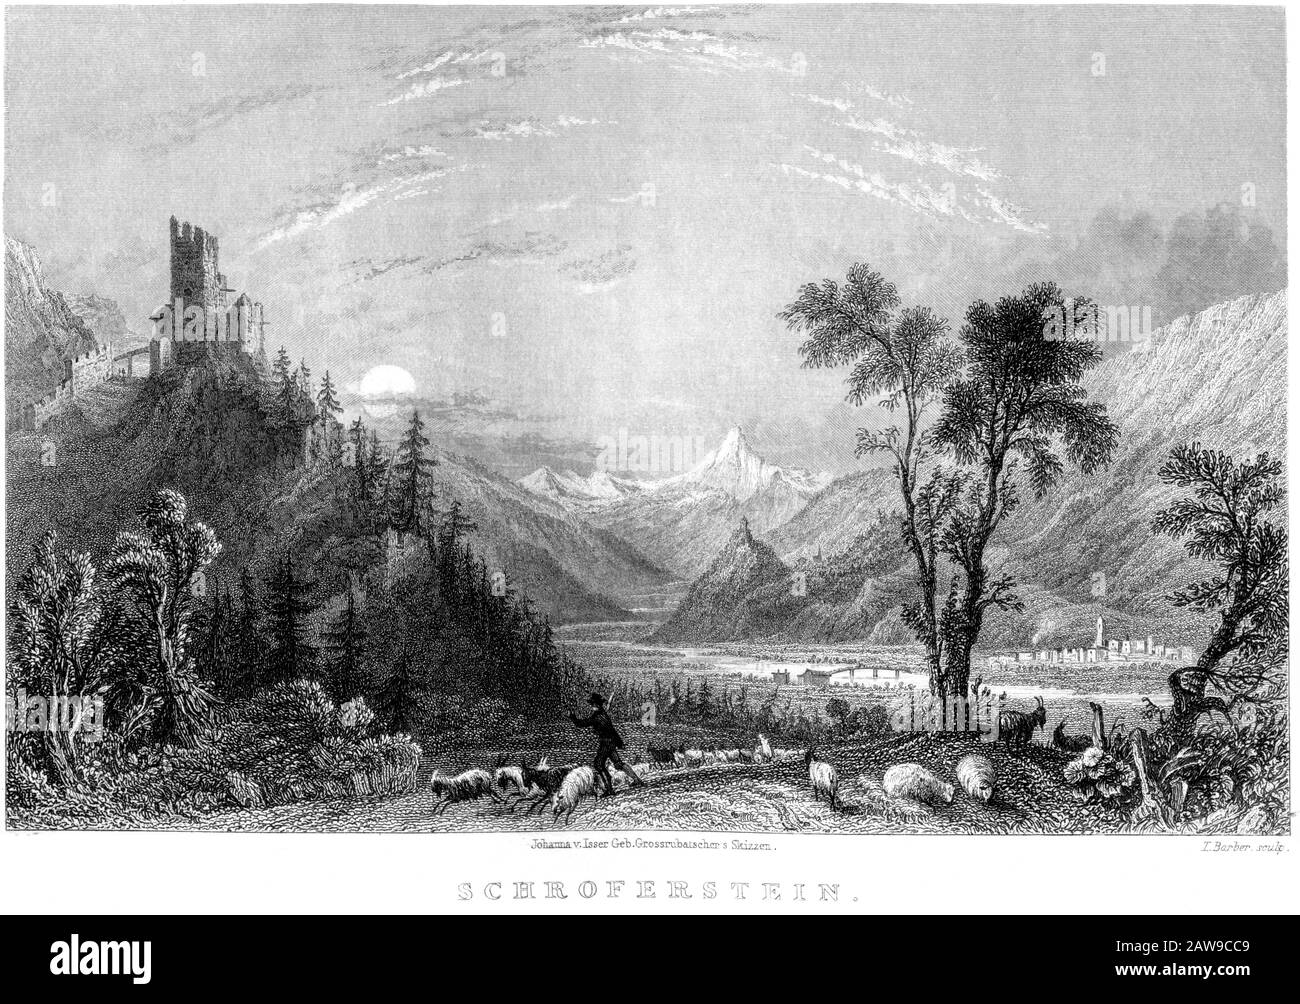 An engraving of Schroferstein (Schrofenstein Landeck in the Tyrol) scanned at high resolution from a book printed in 1836. Believed copyright free. Stock Photo